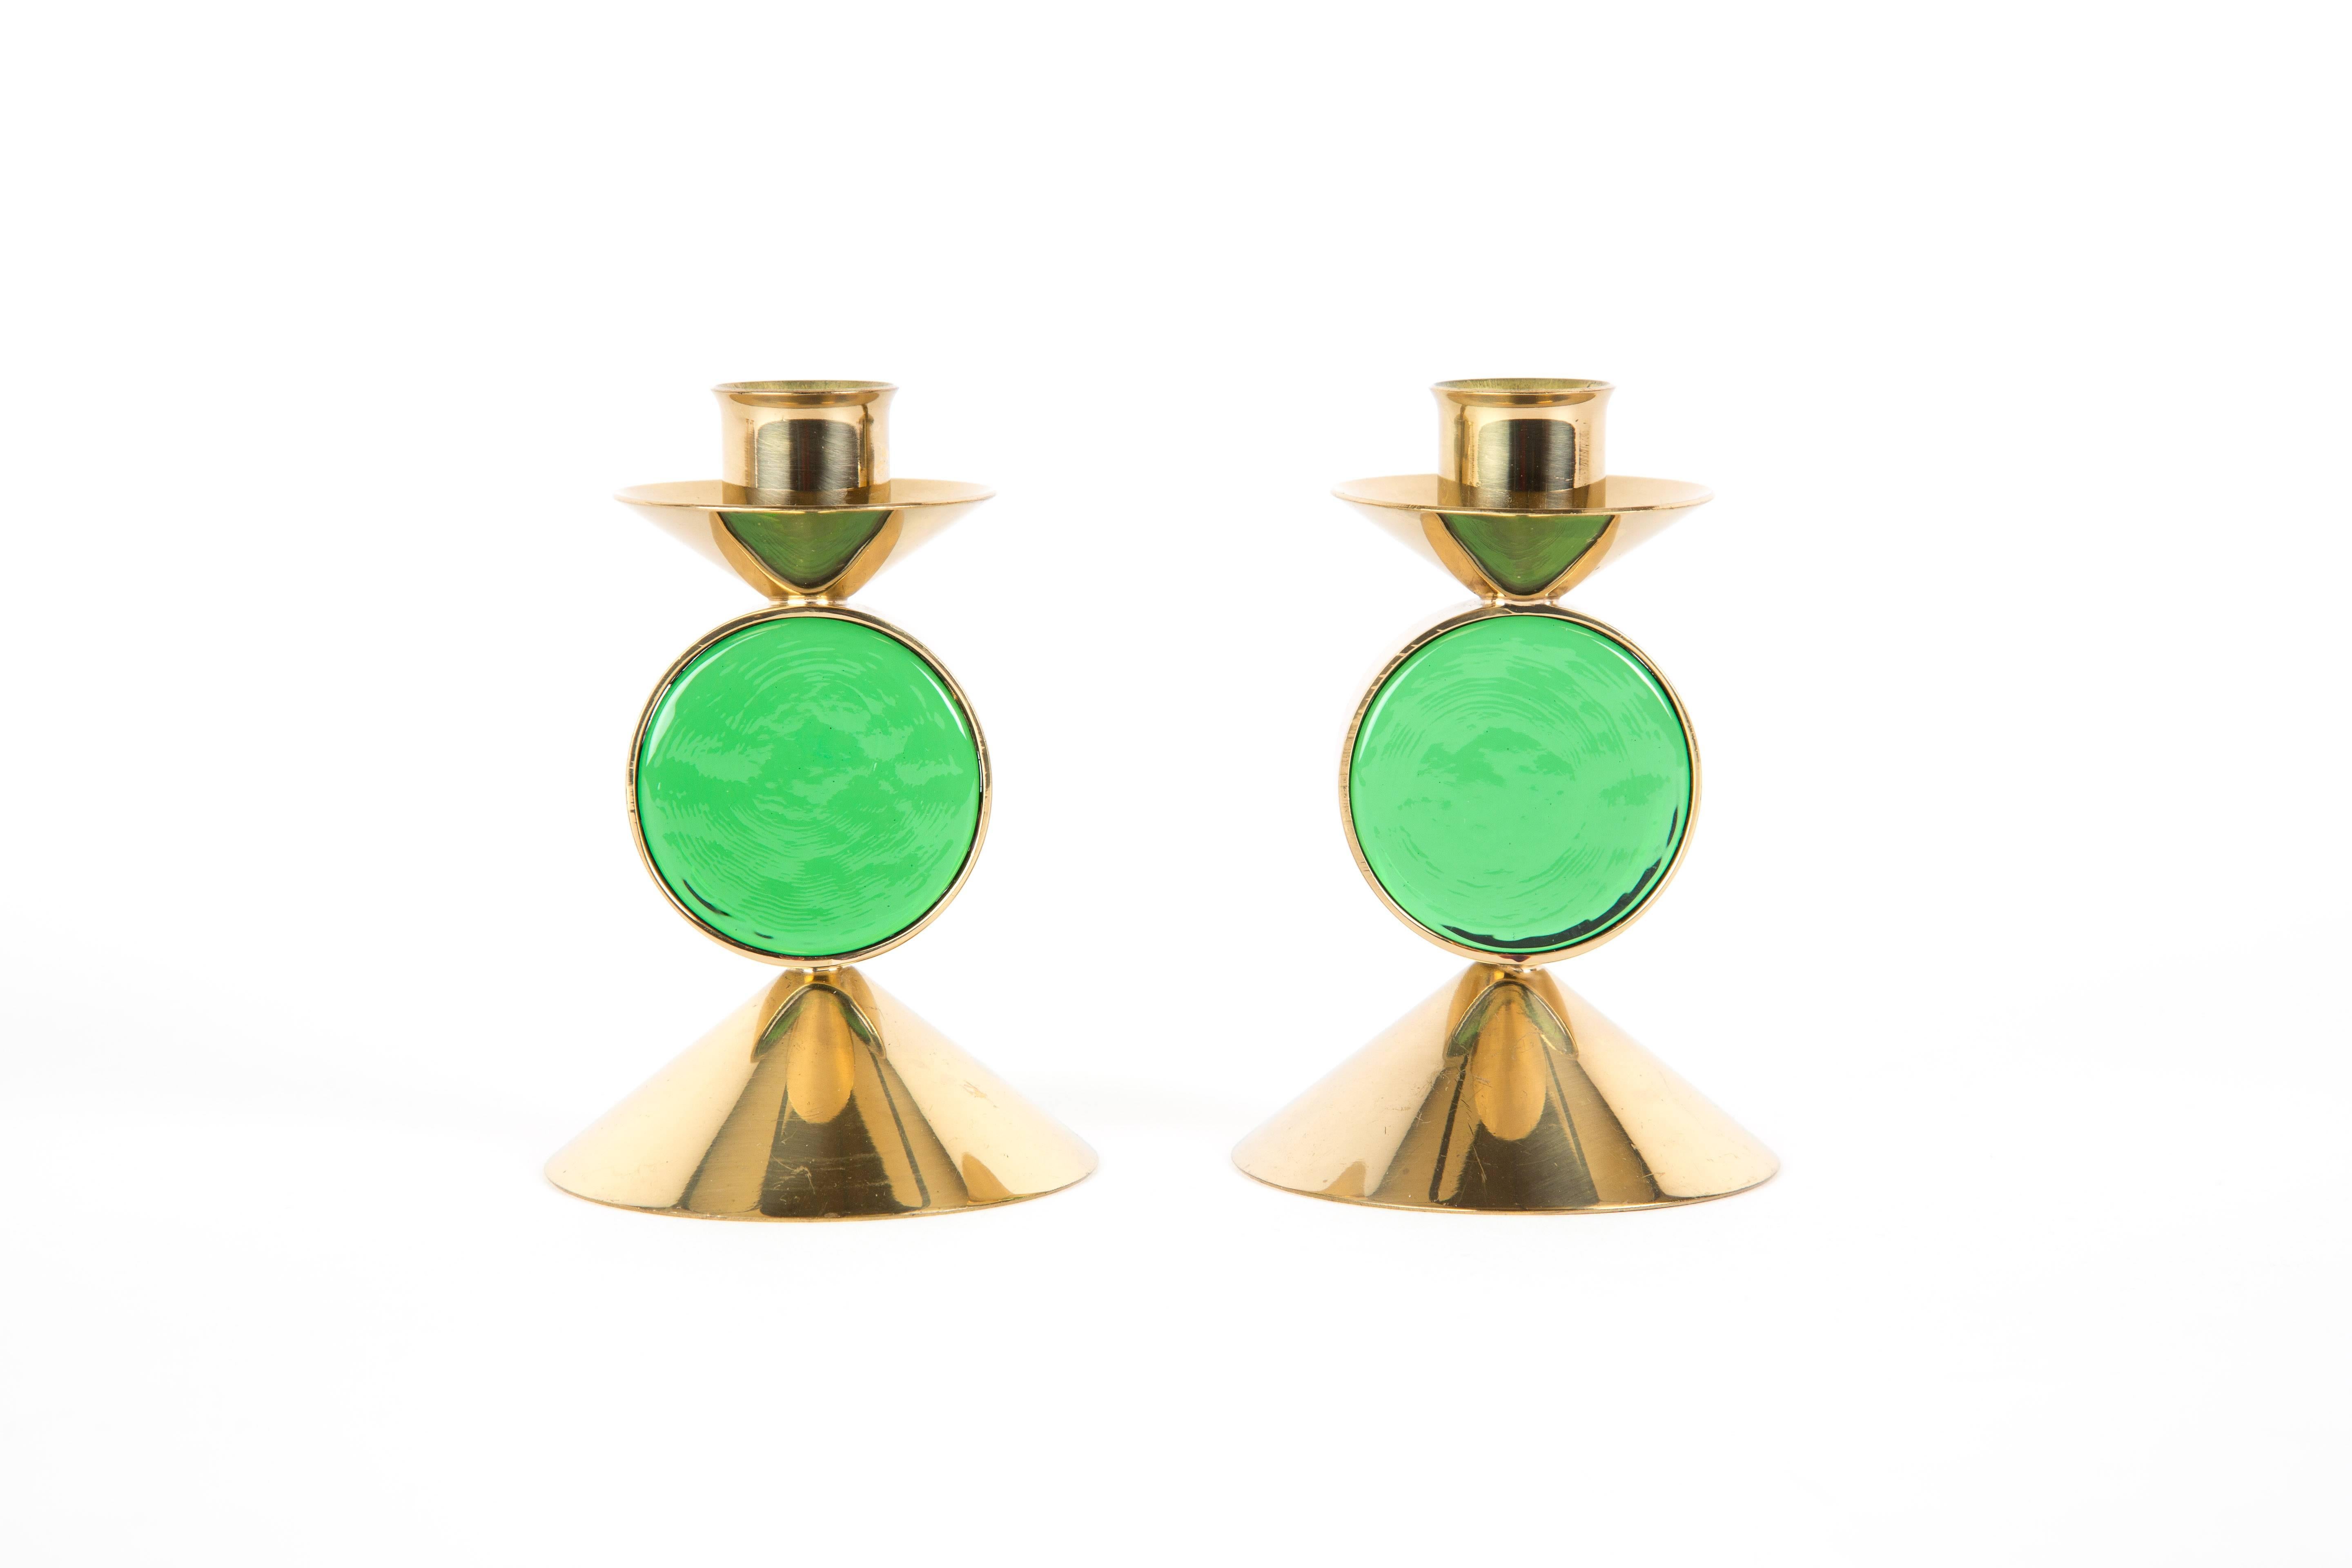  Set of GREEN GUNNAR ANDER candle holders for Ystad-Metall  in Brass 1